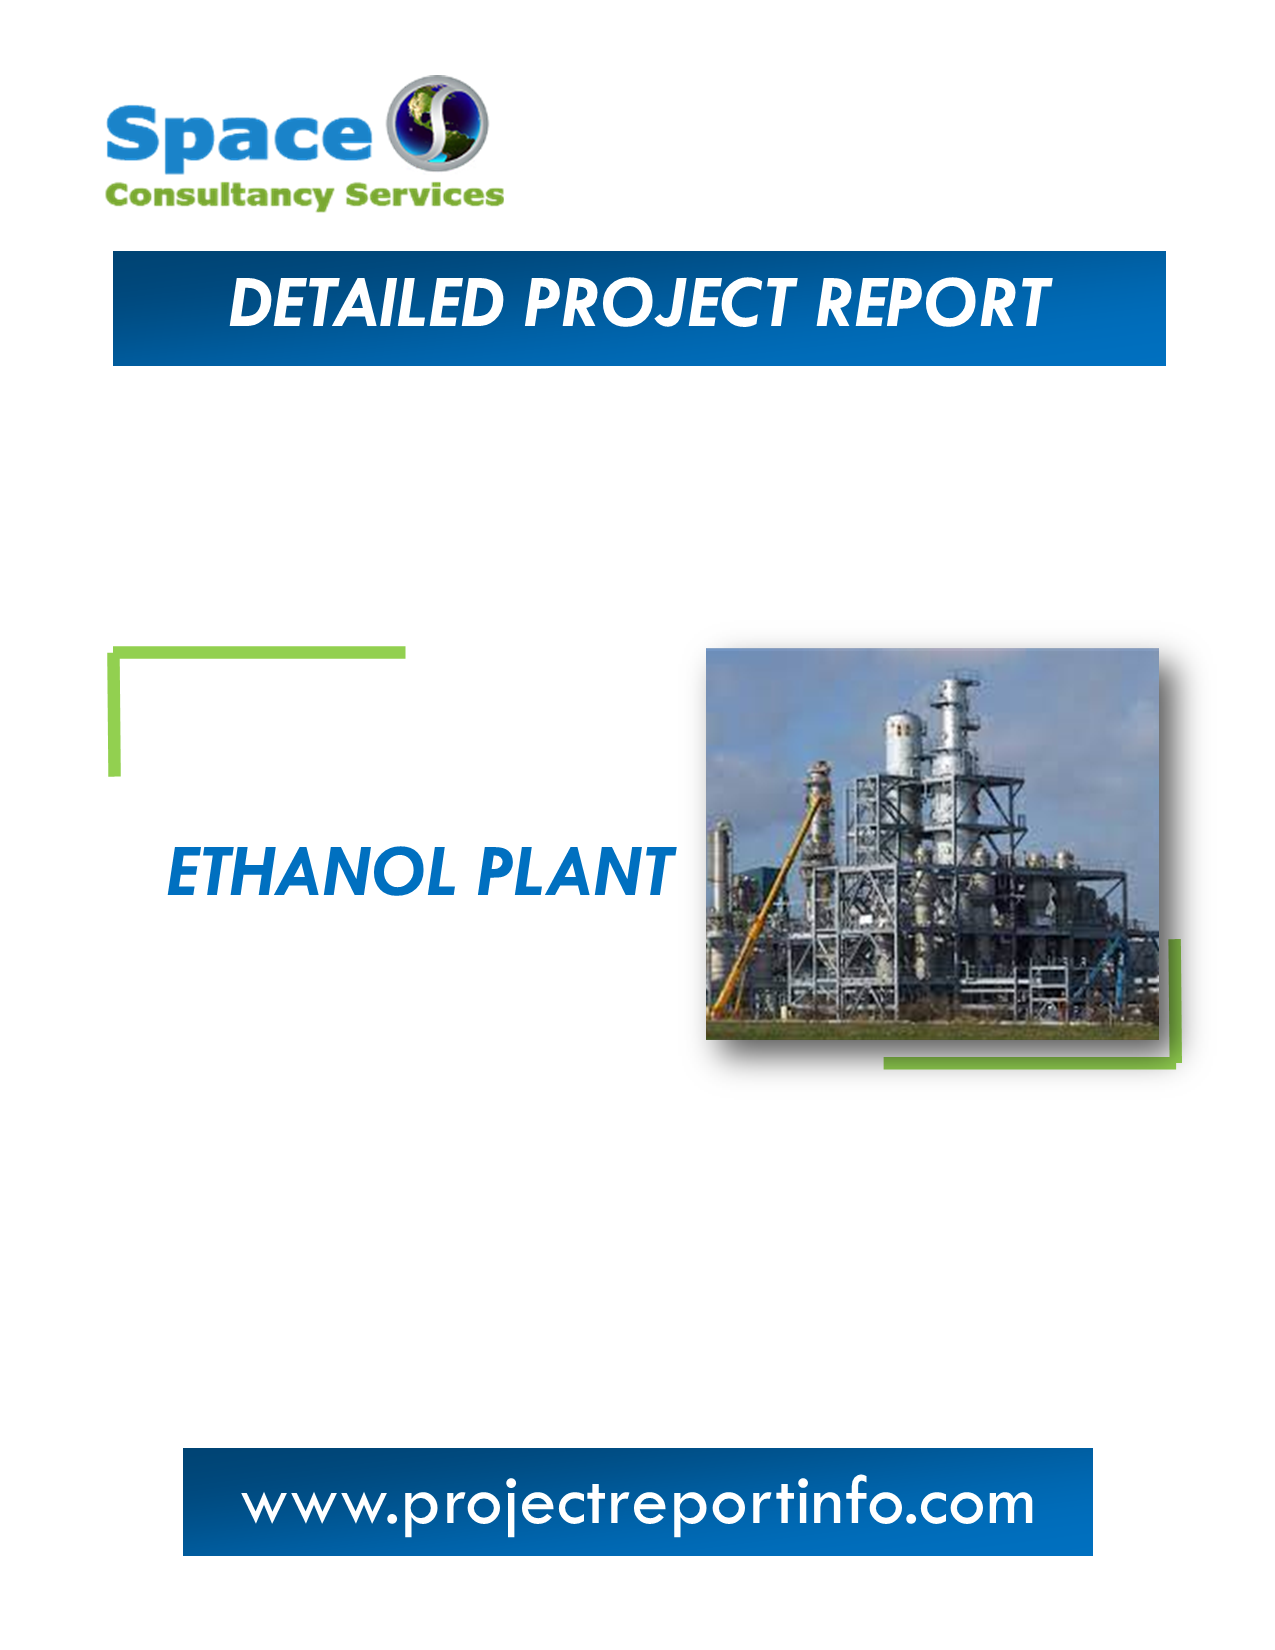 Project Report on Ethanol Plant